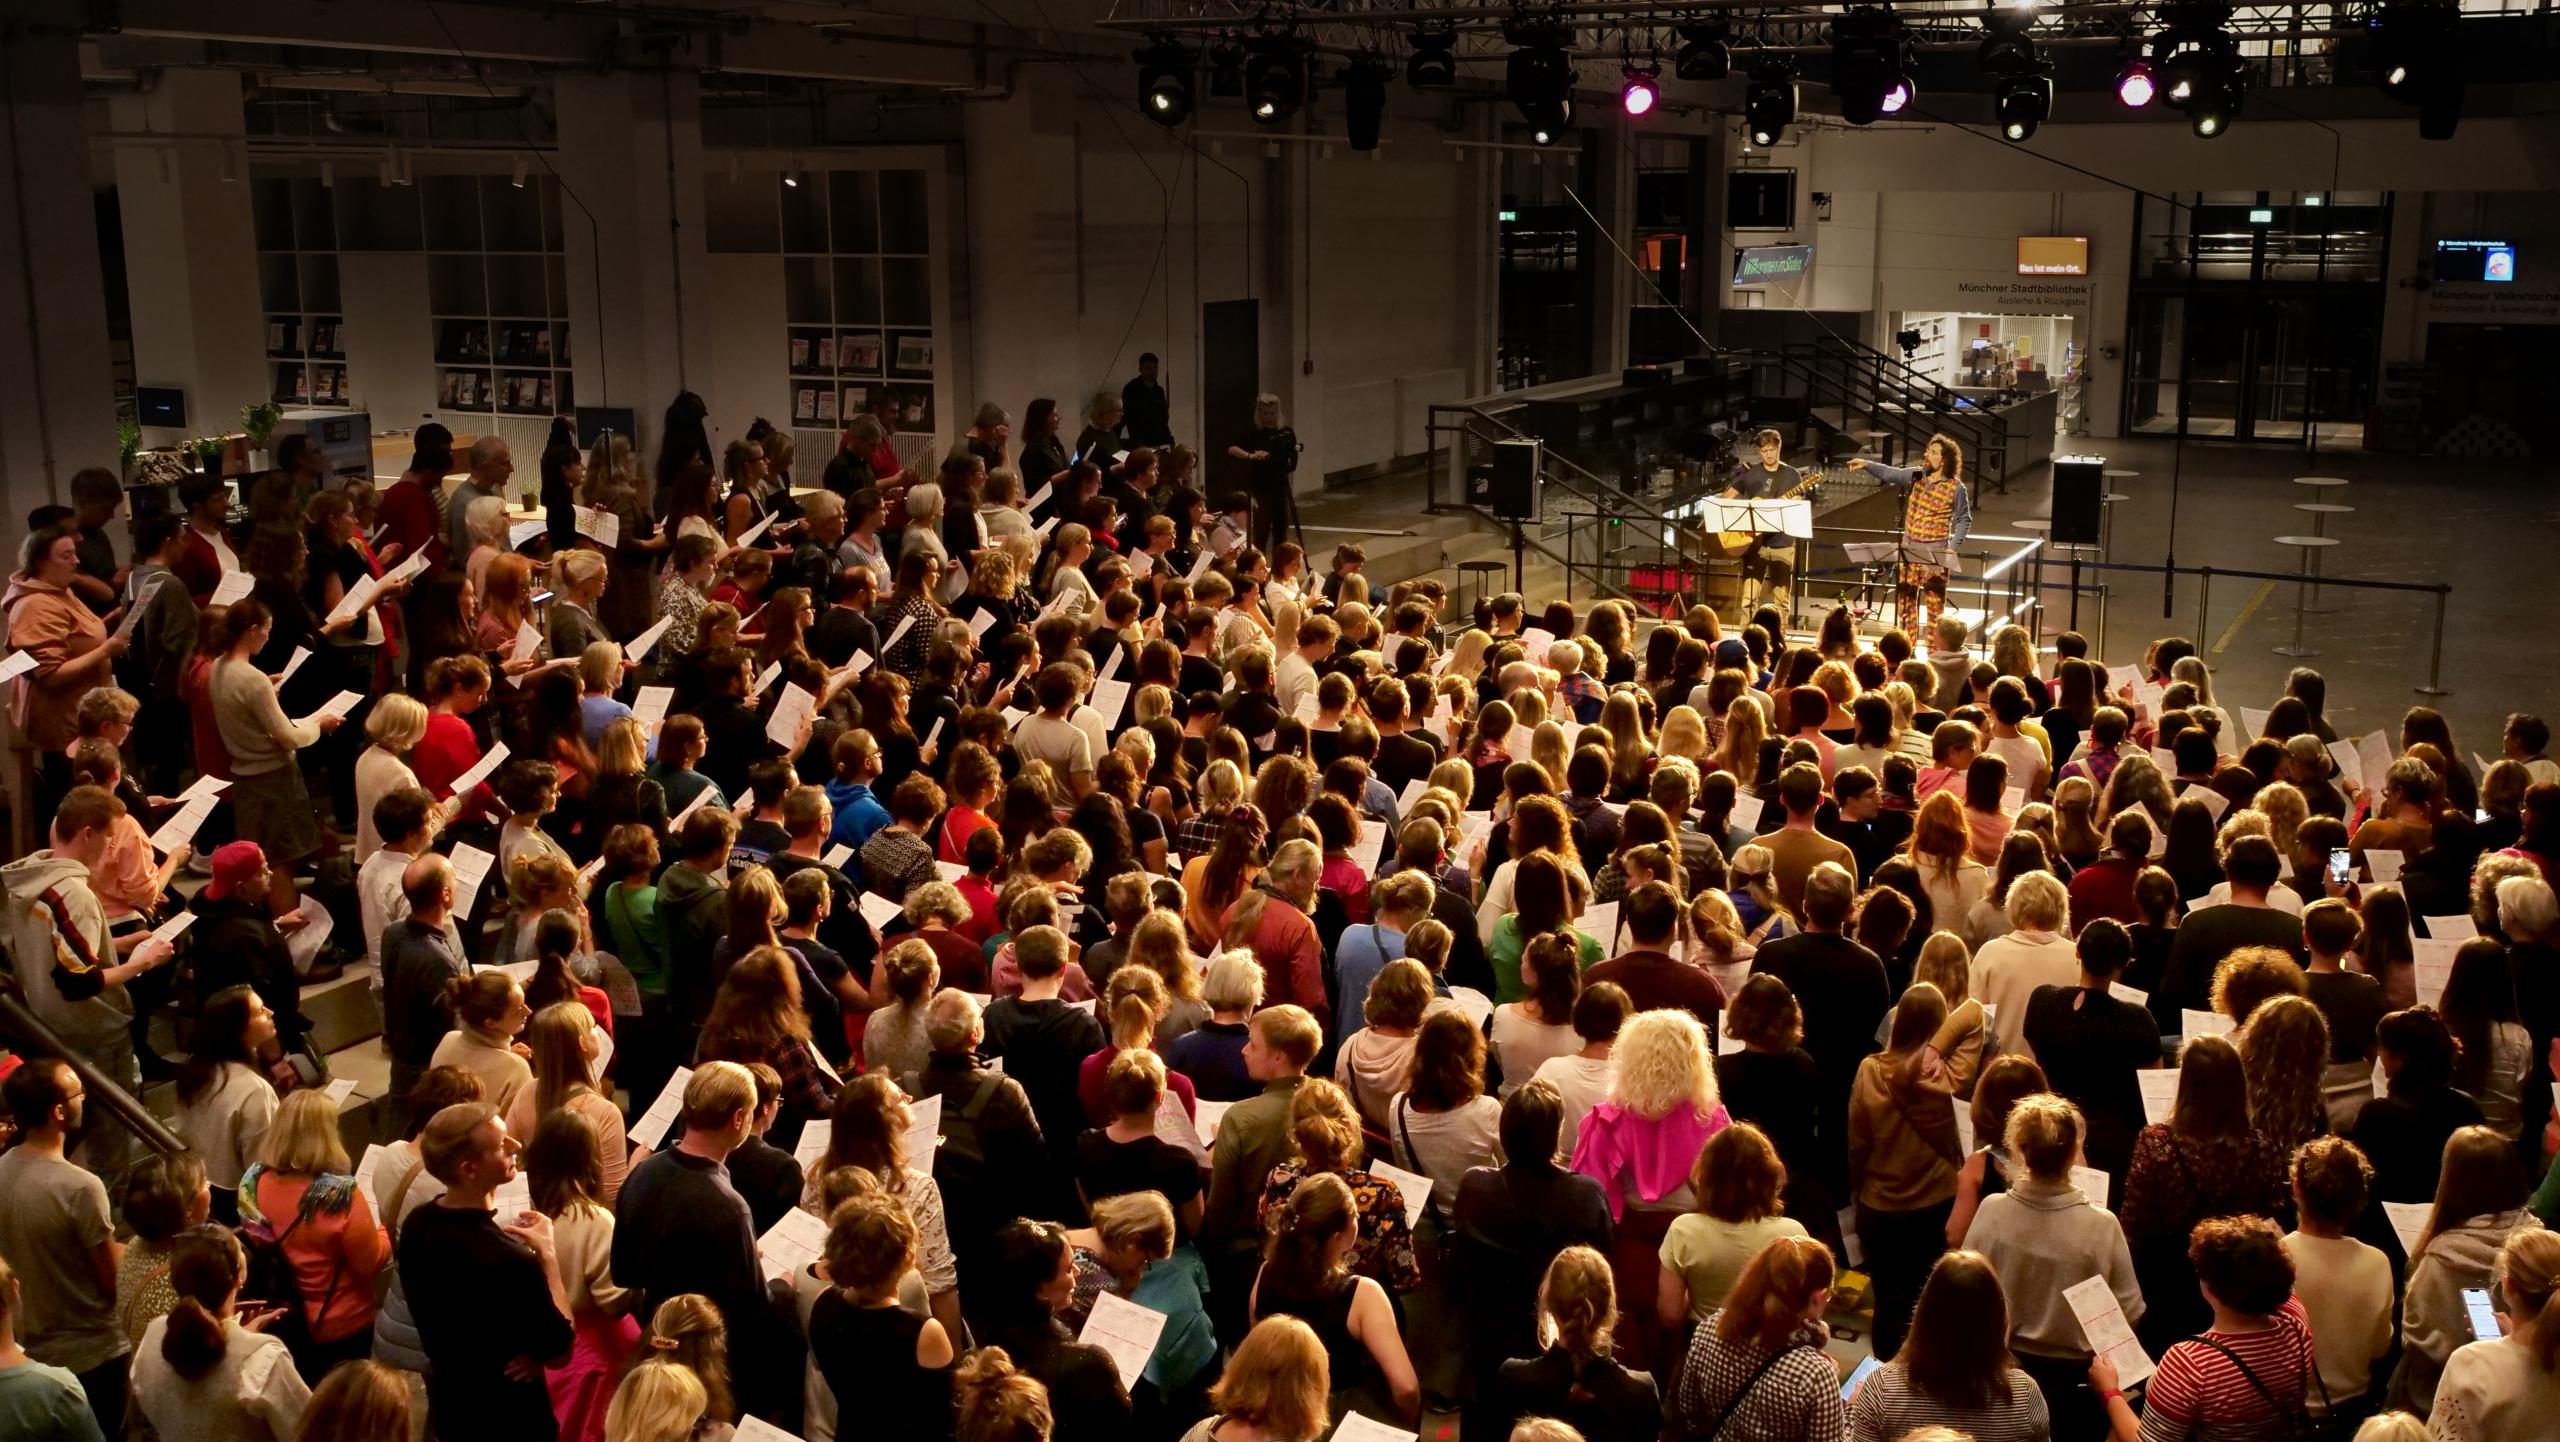 A choir sings in an industrial hall, guided by two musicians on stage.